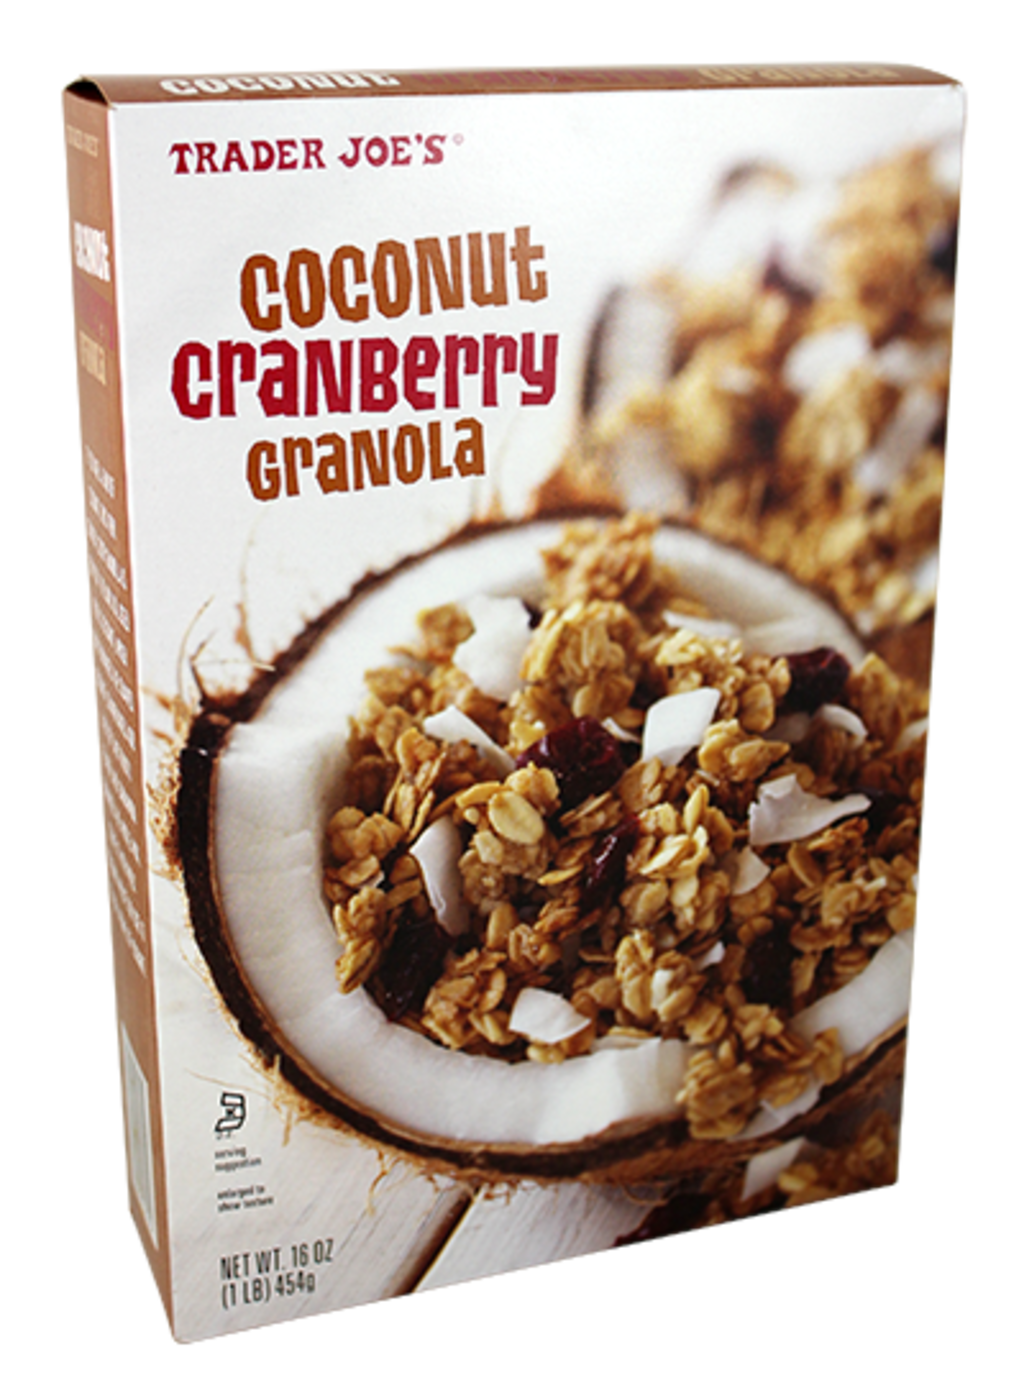 Coconut Cranbery Granola from the Fearless Flyer, photo courtesy of TraderJoes.com